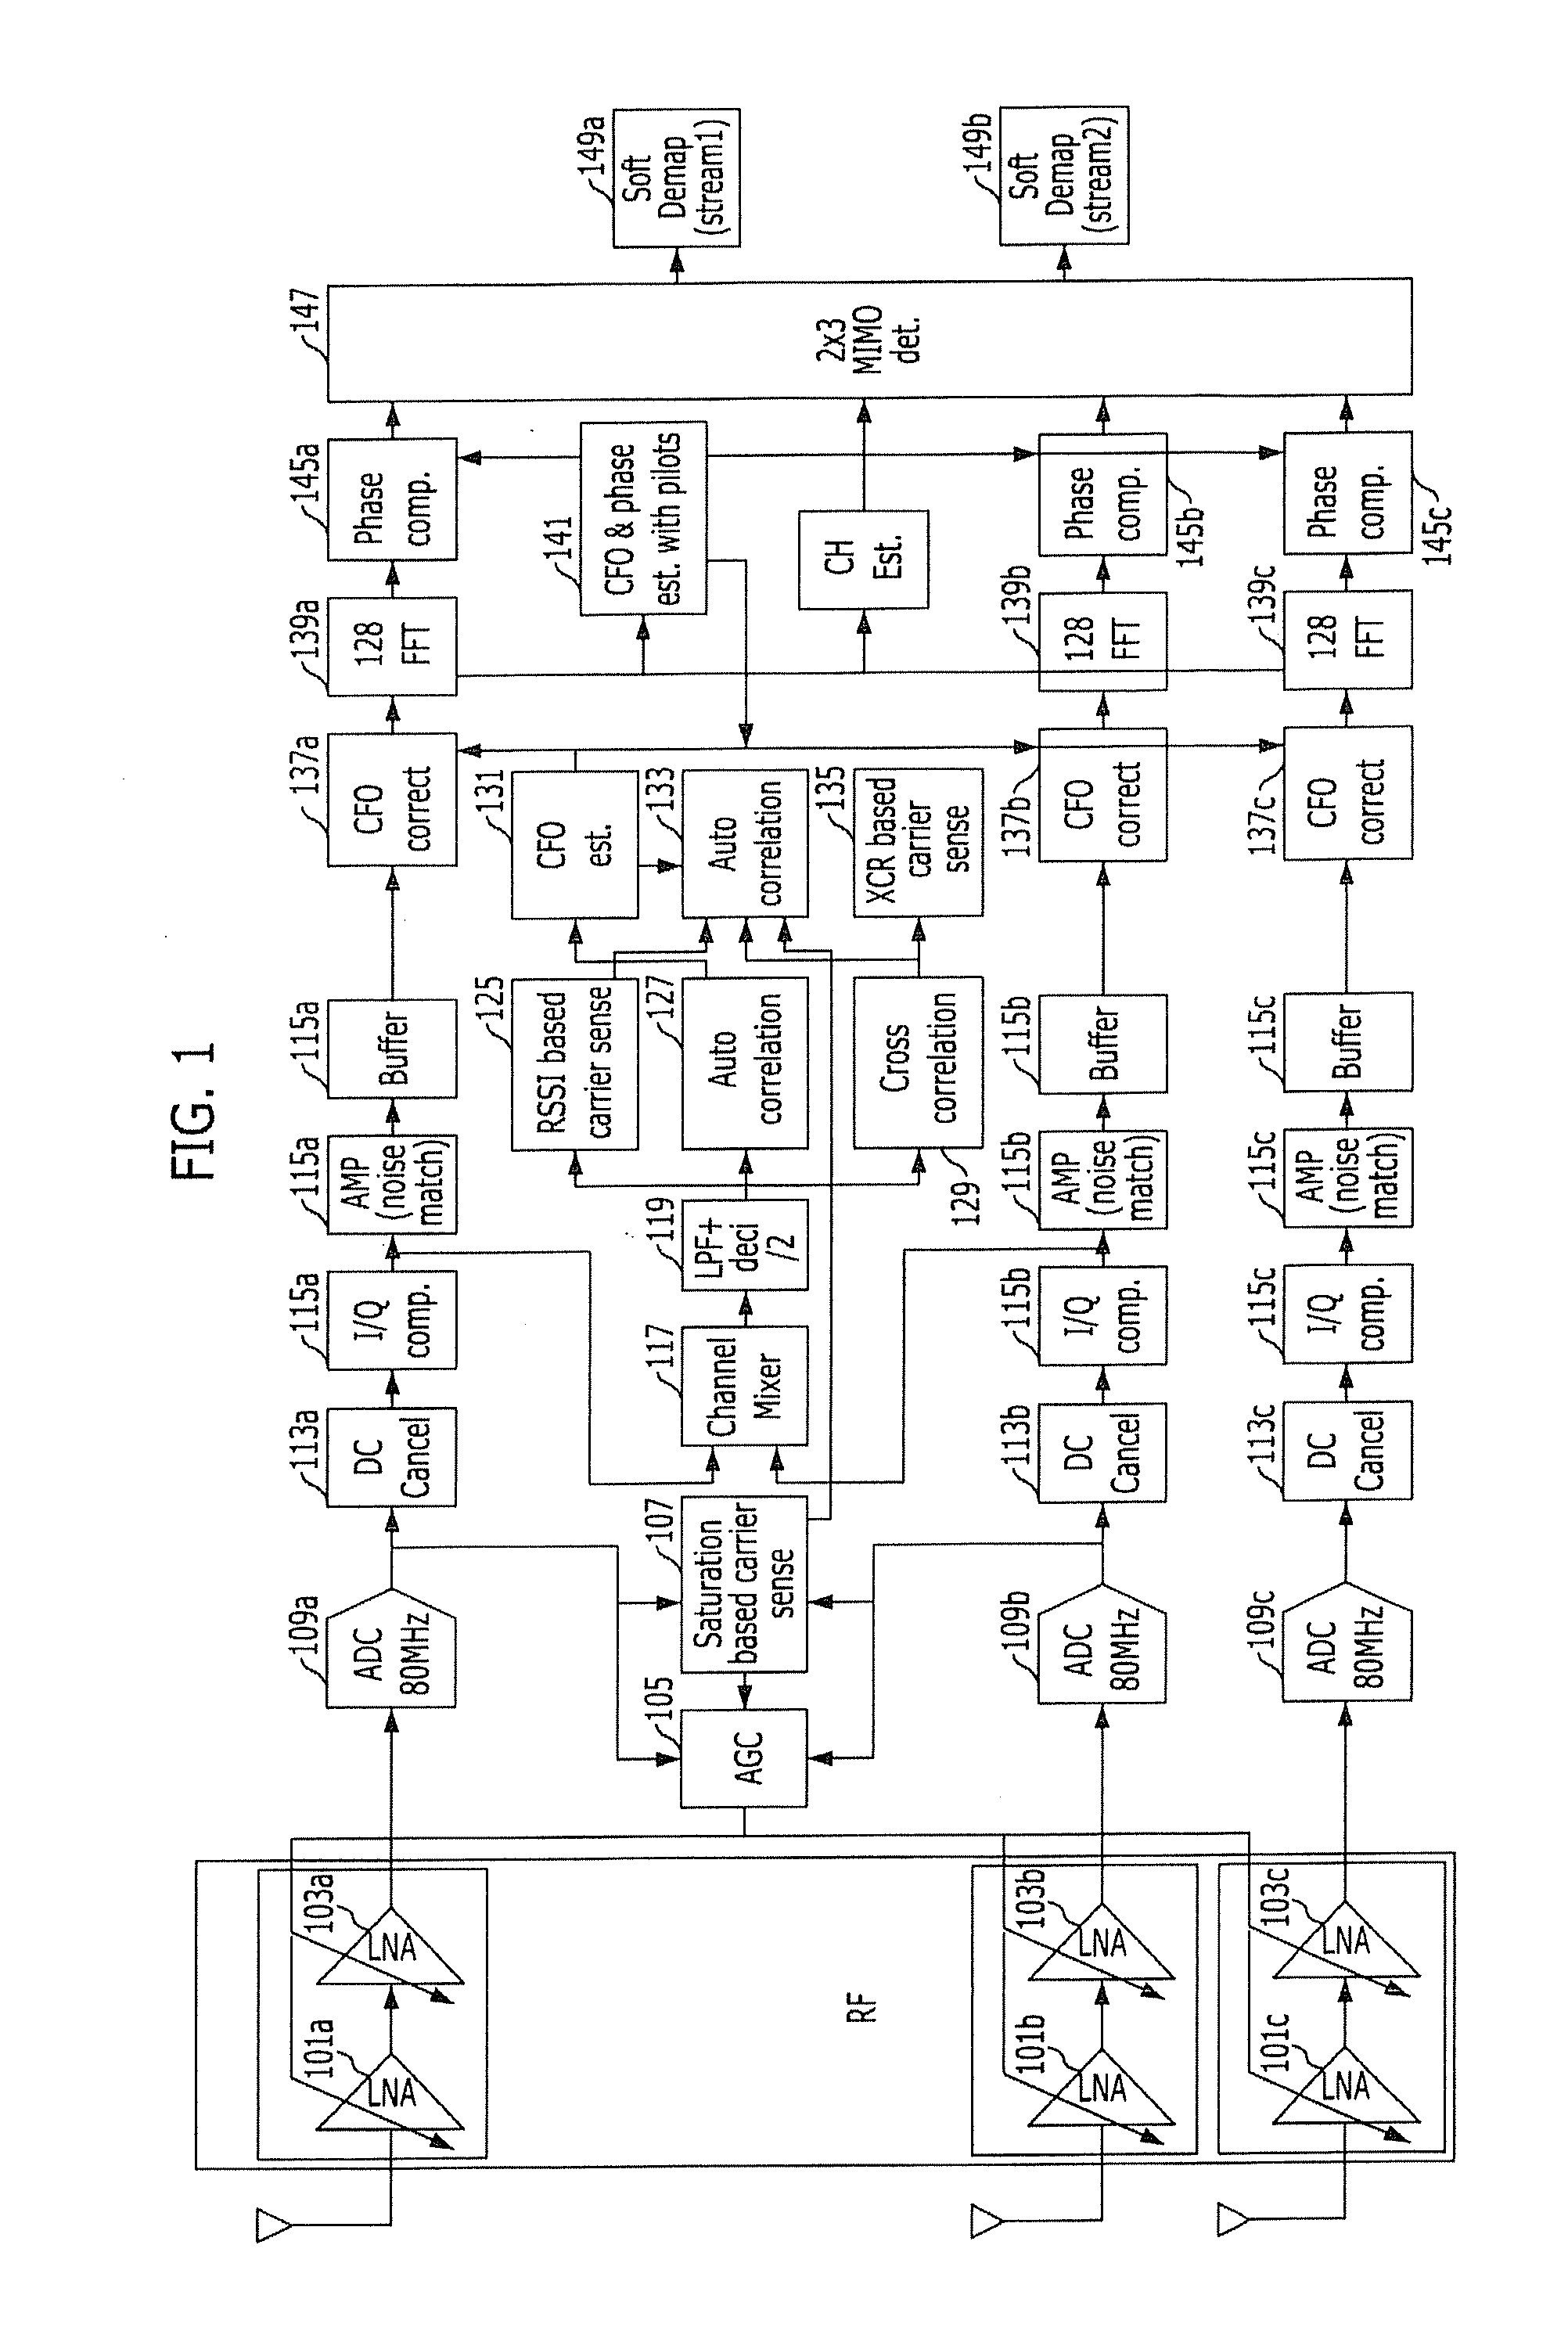 Signal receiving apparatus and method for wireless communication system using multiple antennas